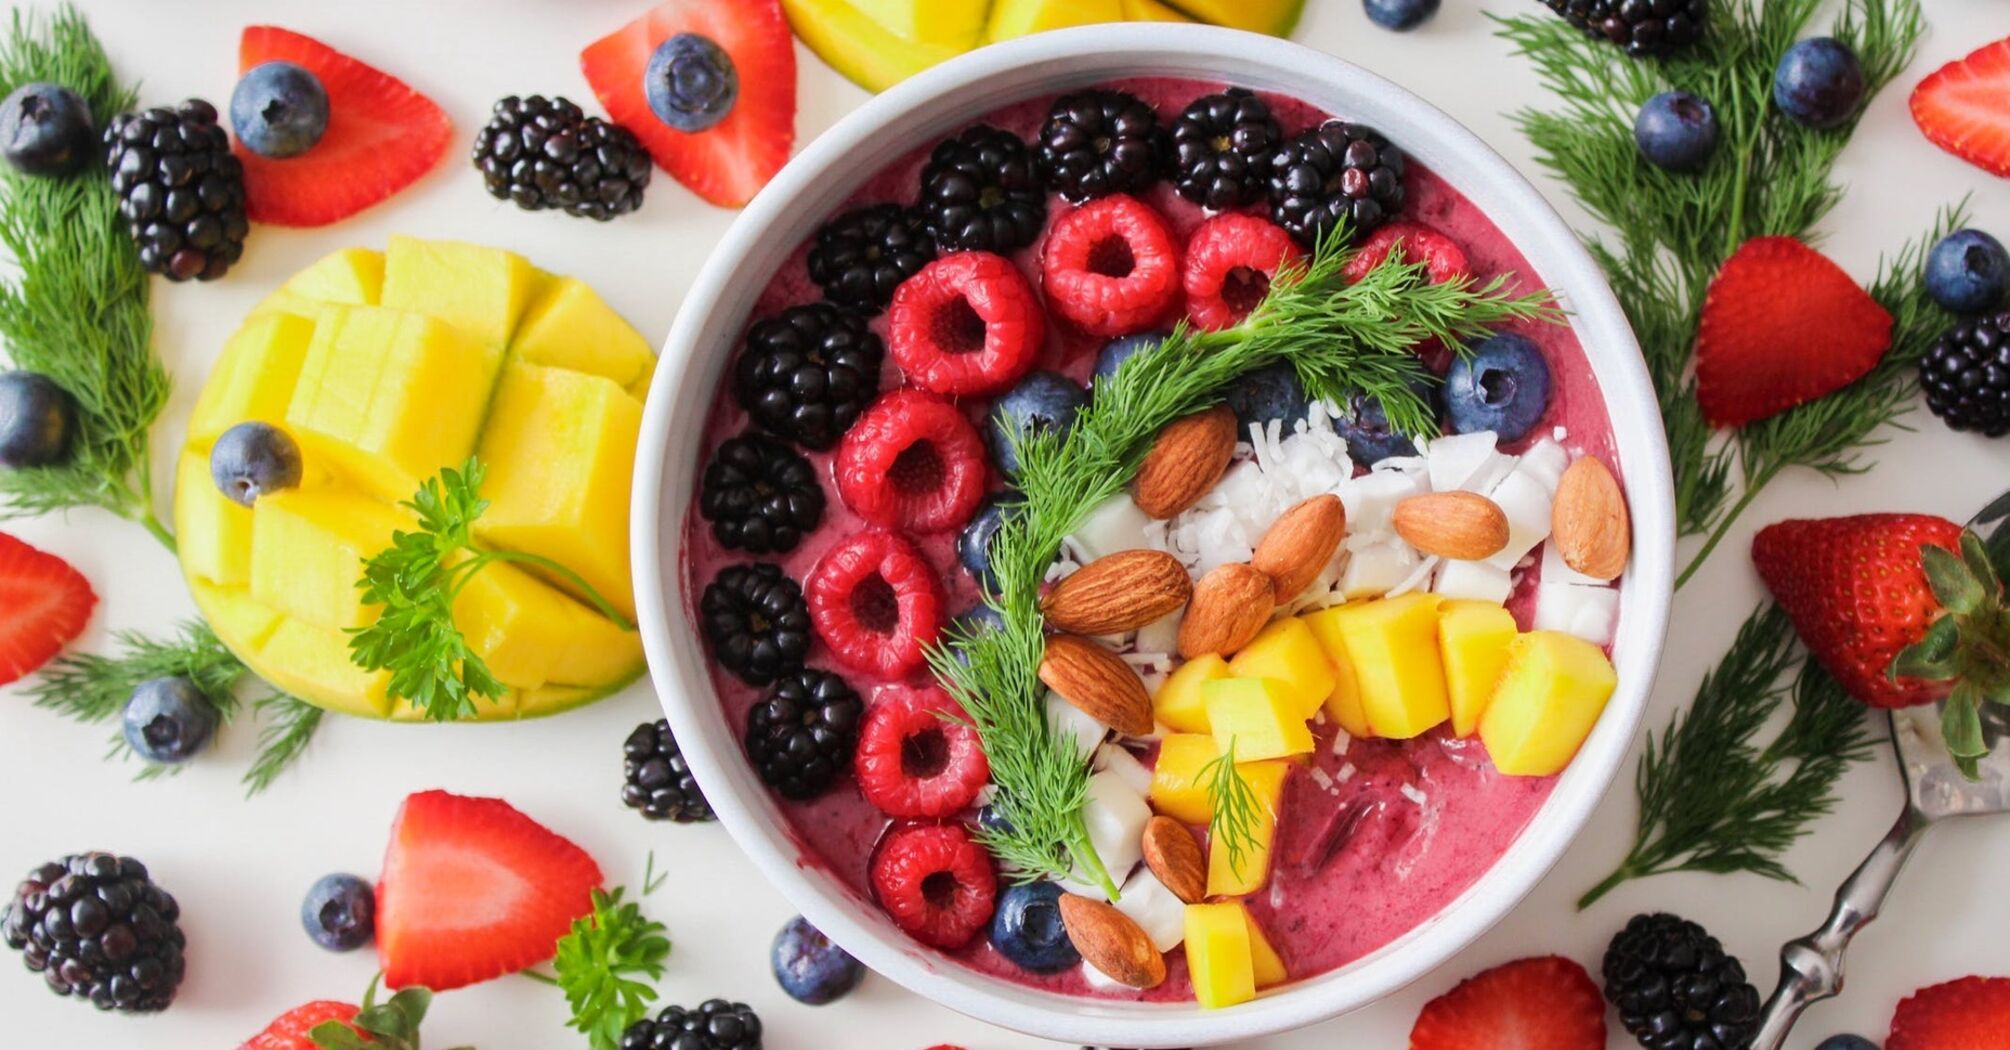 How to start your morning right: 5 simple nutritious breakfast ideas